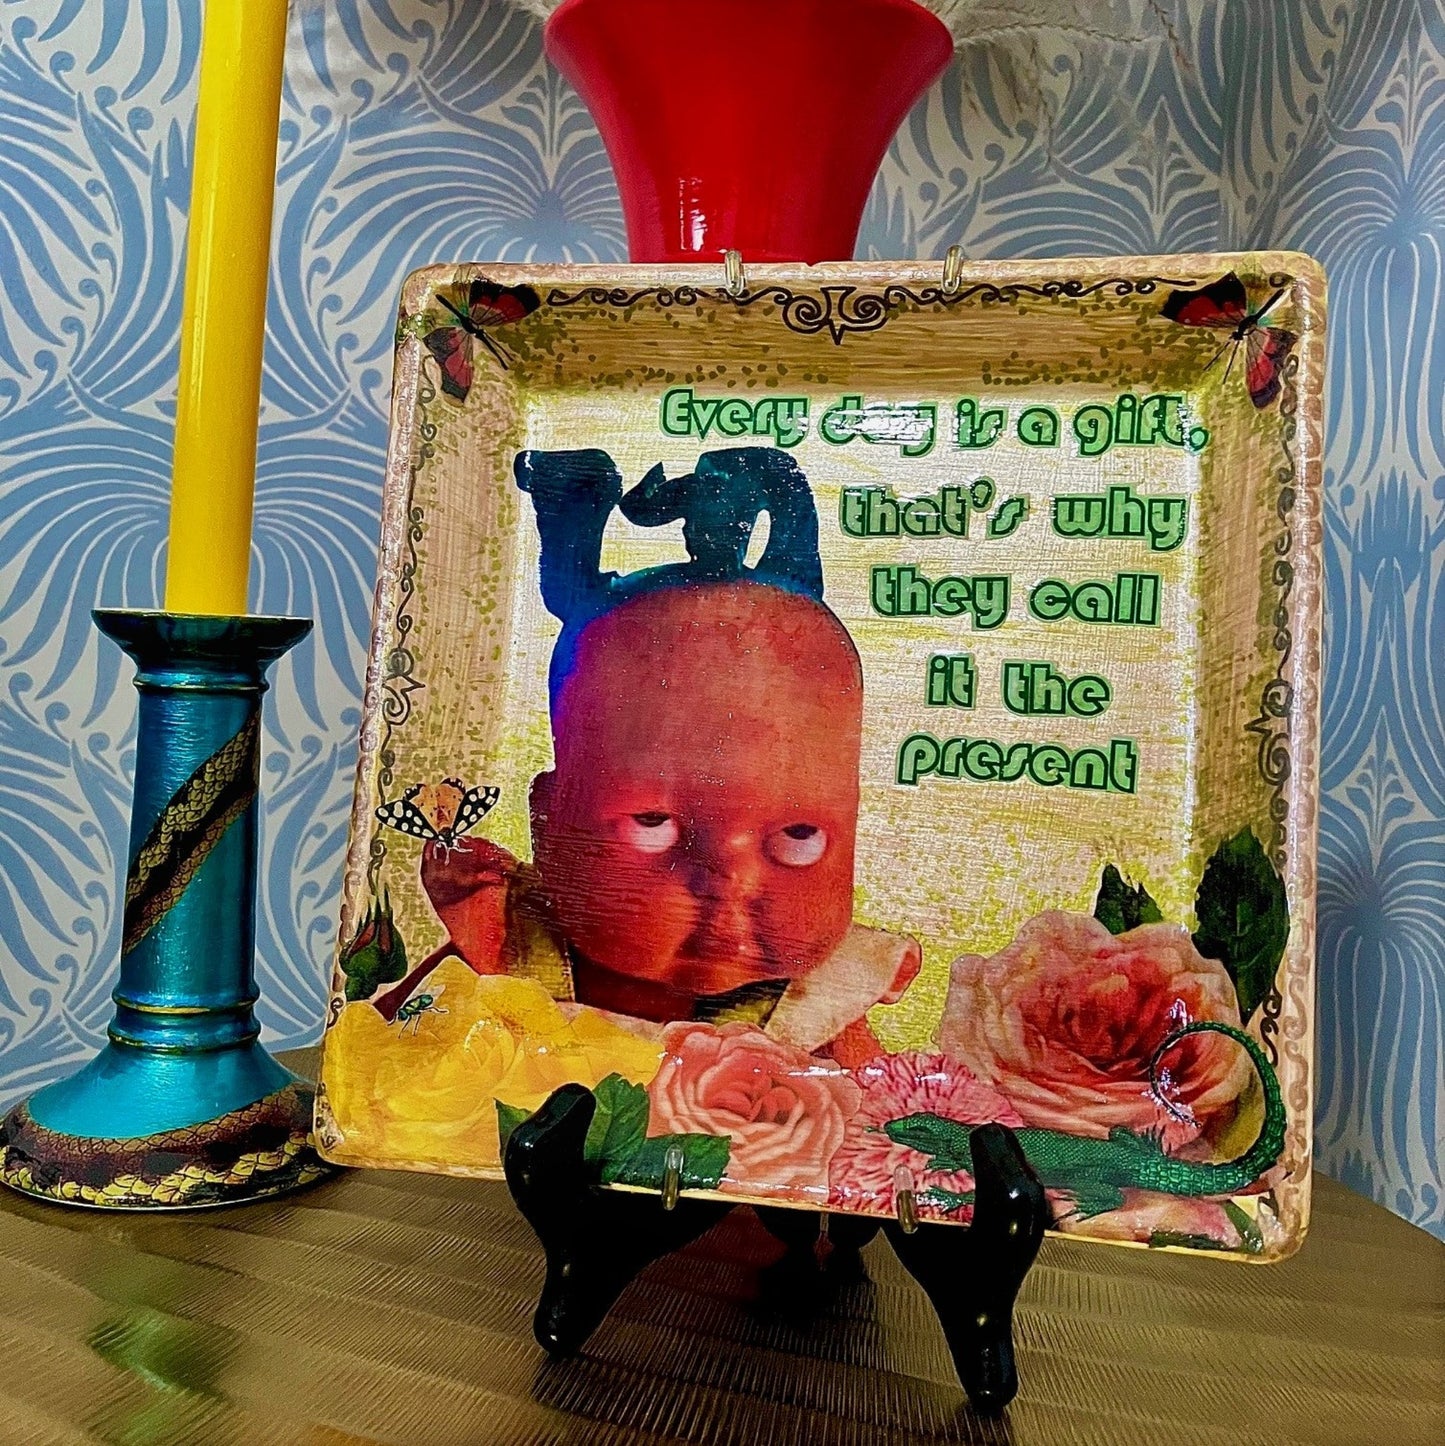 House of Frisson "Every Day Is A Gift, That's Why They Call It The Present" Beige Wall Plate. Collage artwork on upcycled plate, featuring a doll rolling  eyes, flowers, and a lizard. Plate on a plat stand, resting on a table.